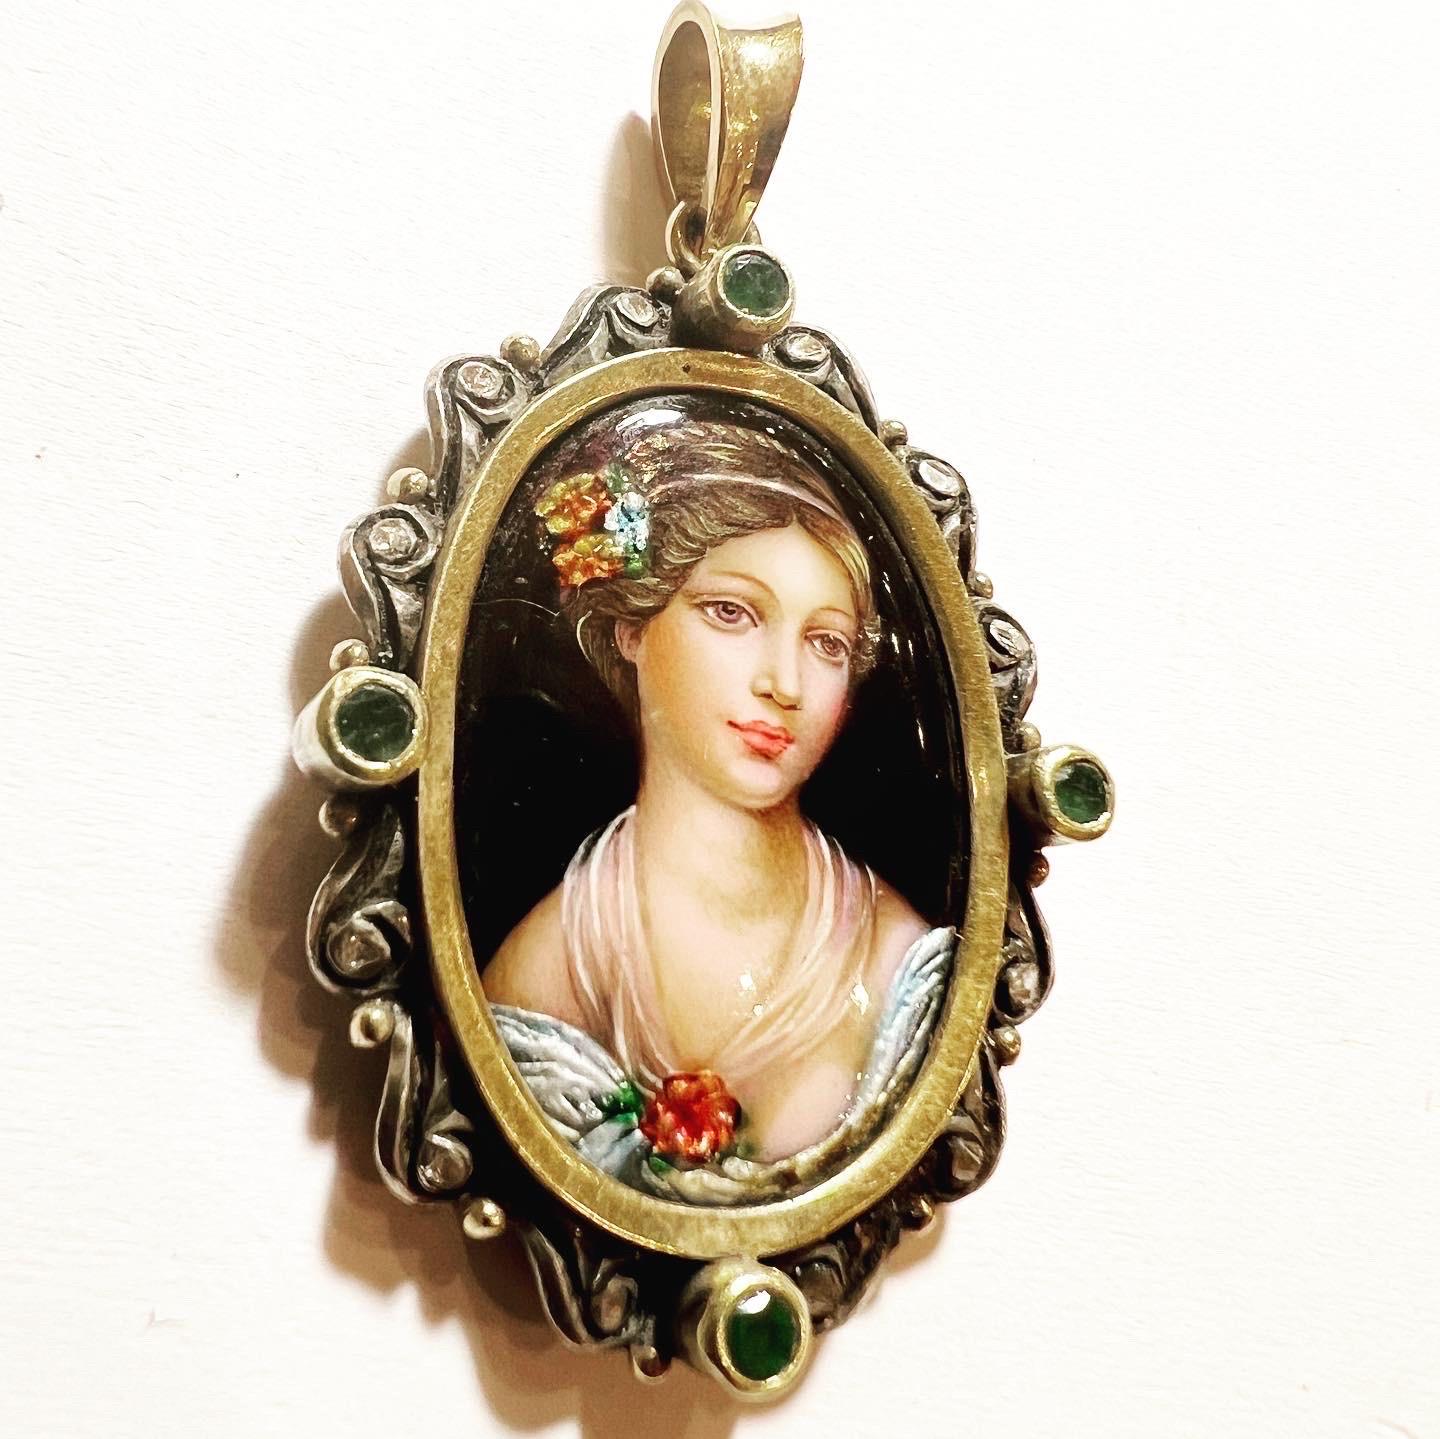 1960s Enamel 18k Yellow Gold Diamonds Emeralds Female Portrait Medal Pendant.
High quality hand painted enamel.
Amazing original pendant.
A gorgeous design, it could be a special addition to any antique jewelry collection!

Total weight of the